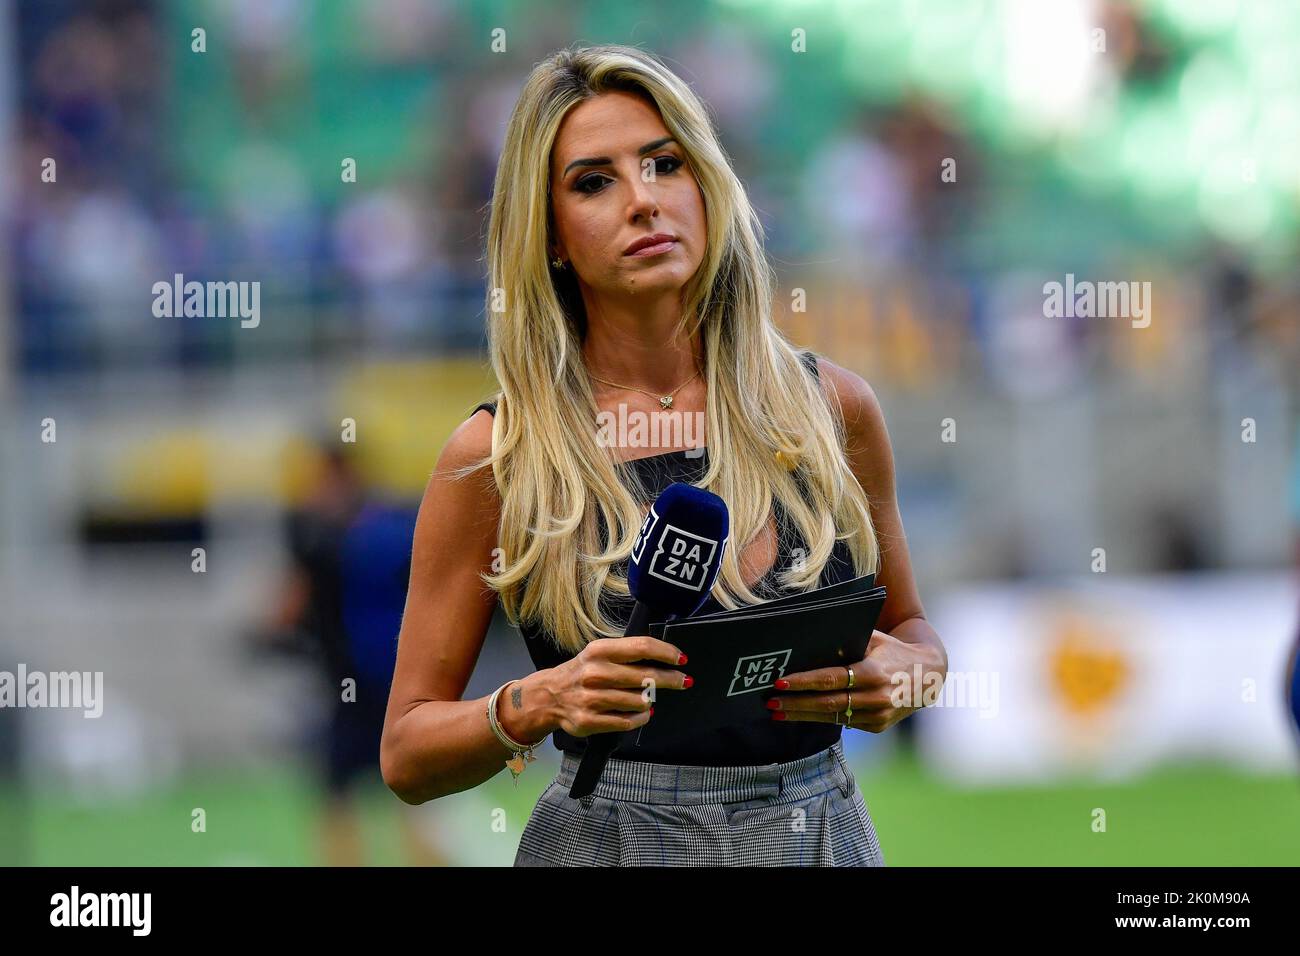 Milano, Italy. 10th, September 2022. The Italian journalist and television presenter Giorgia Rossi seen before the Serie A match between Inter and Torino at Giuseppe Meazza in Milano. (Photo credit: Gonzales Photo - Tommaso Fimiano). Stock Photo